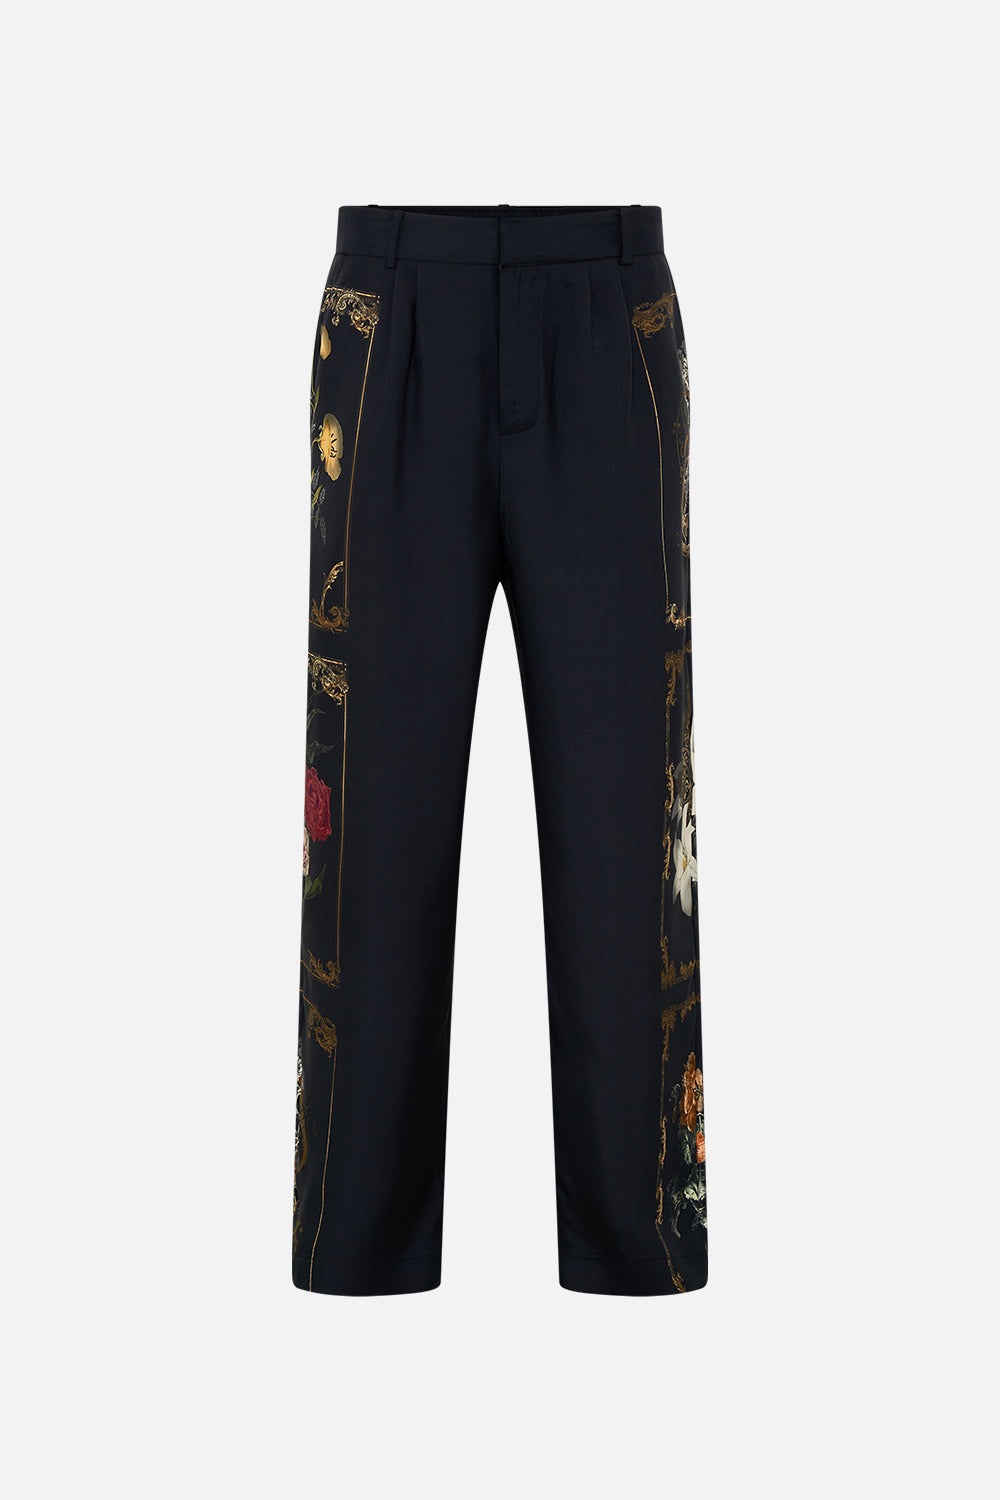 Hotel Franks by CAMILLA mens black lounge pants in Magic in The Manuscripts print